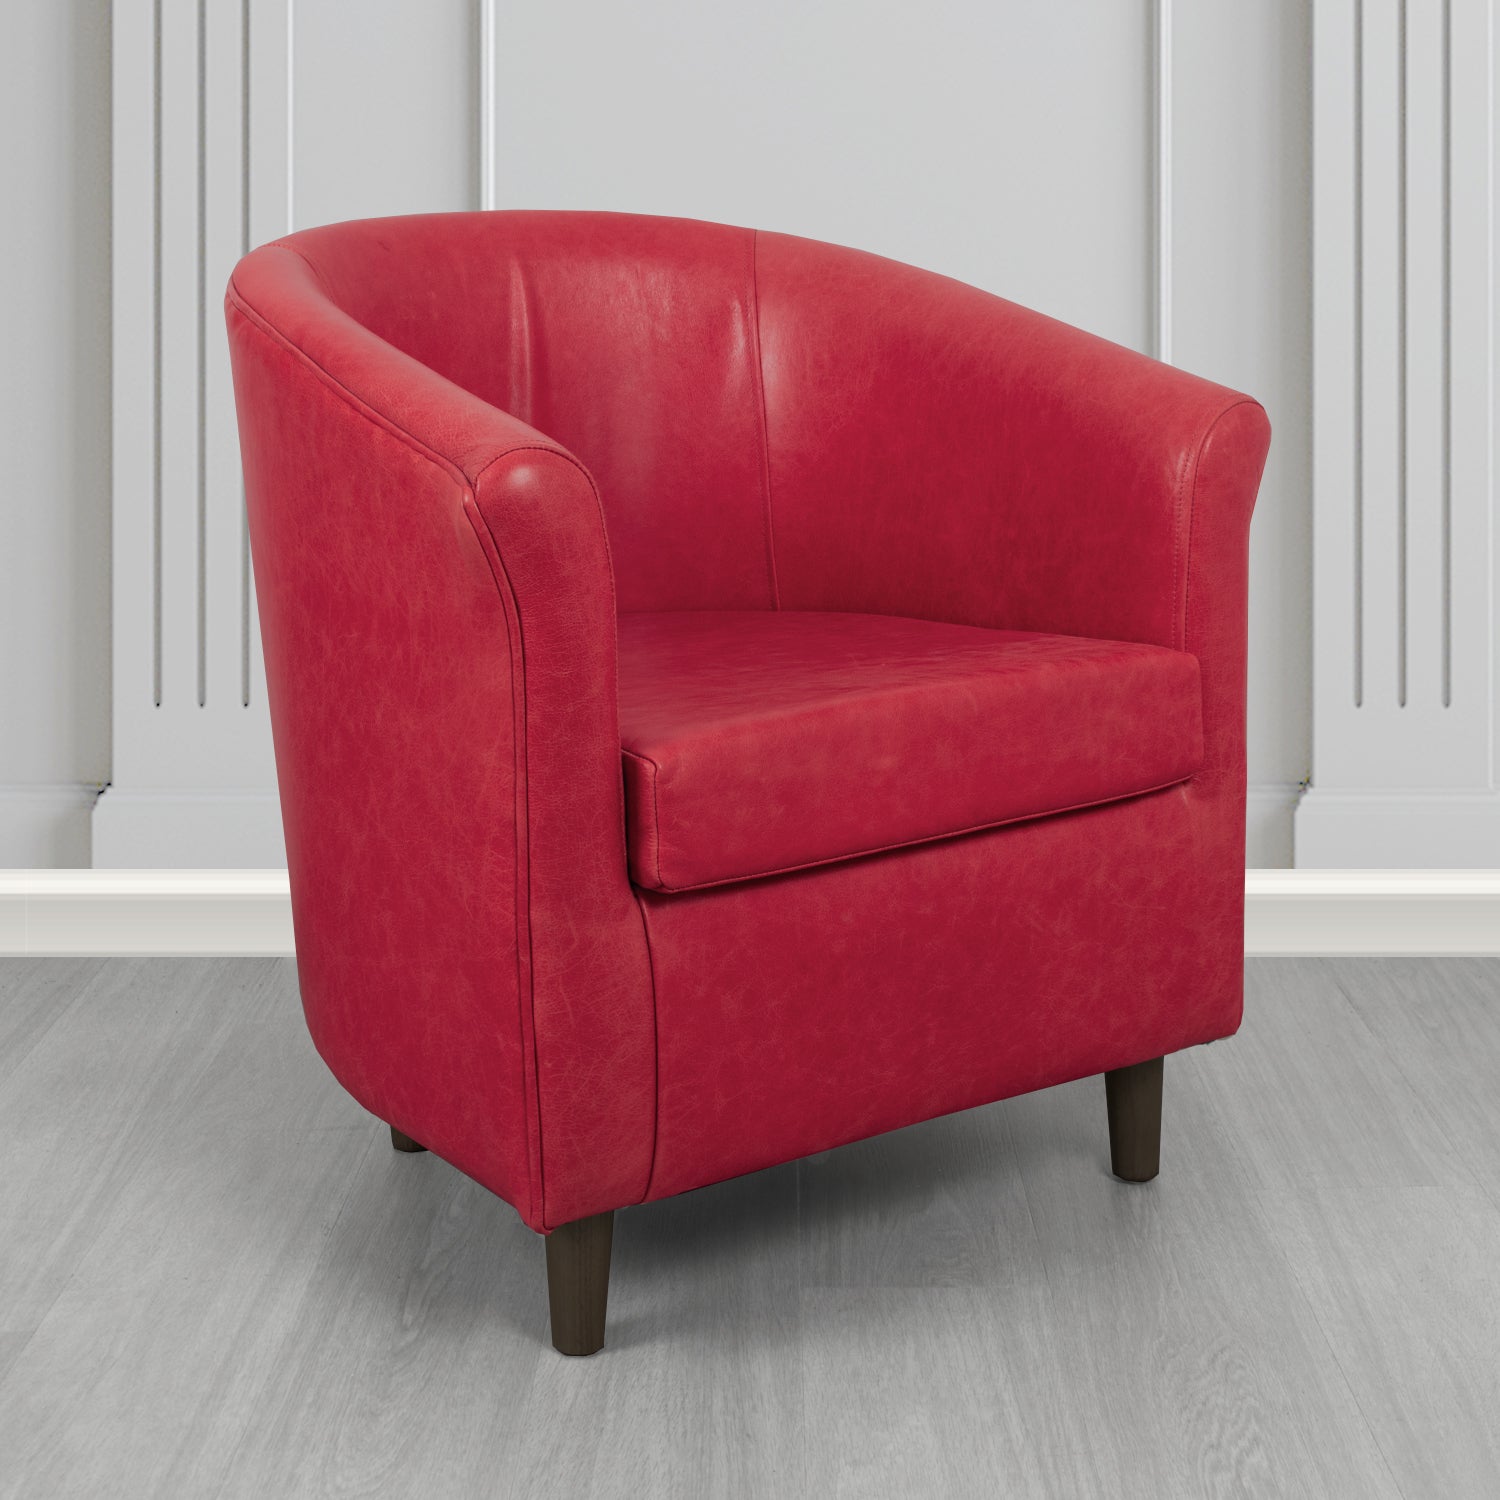 Tuscany Tub Chair in Crib 5 Old English Gamay Genuine Leather - The Tub Chair Shop